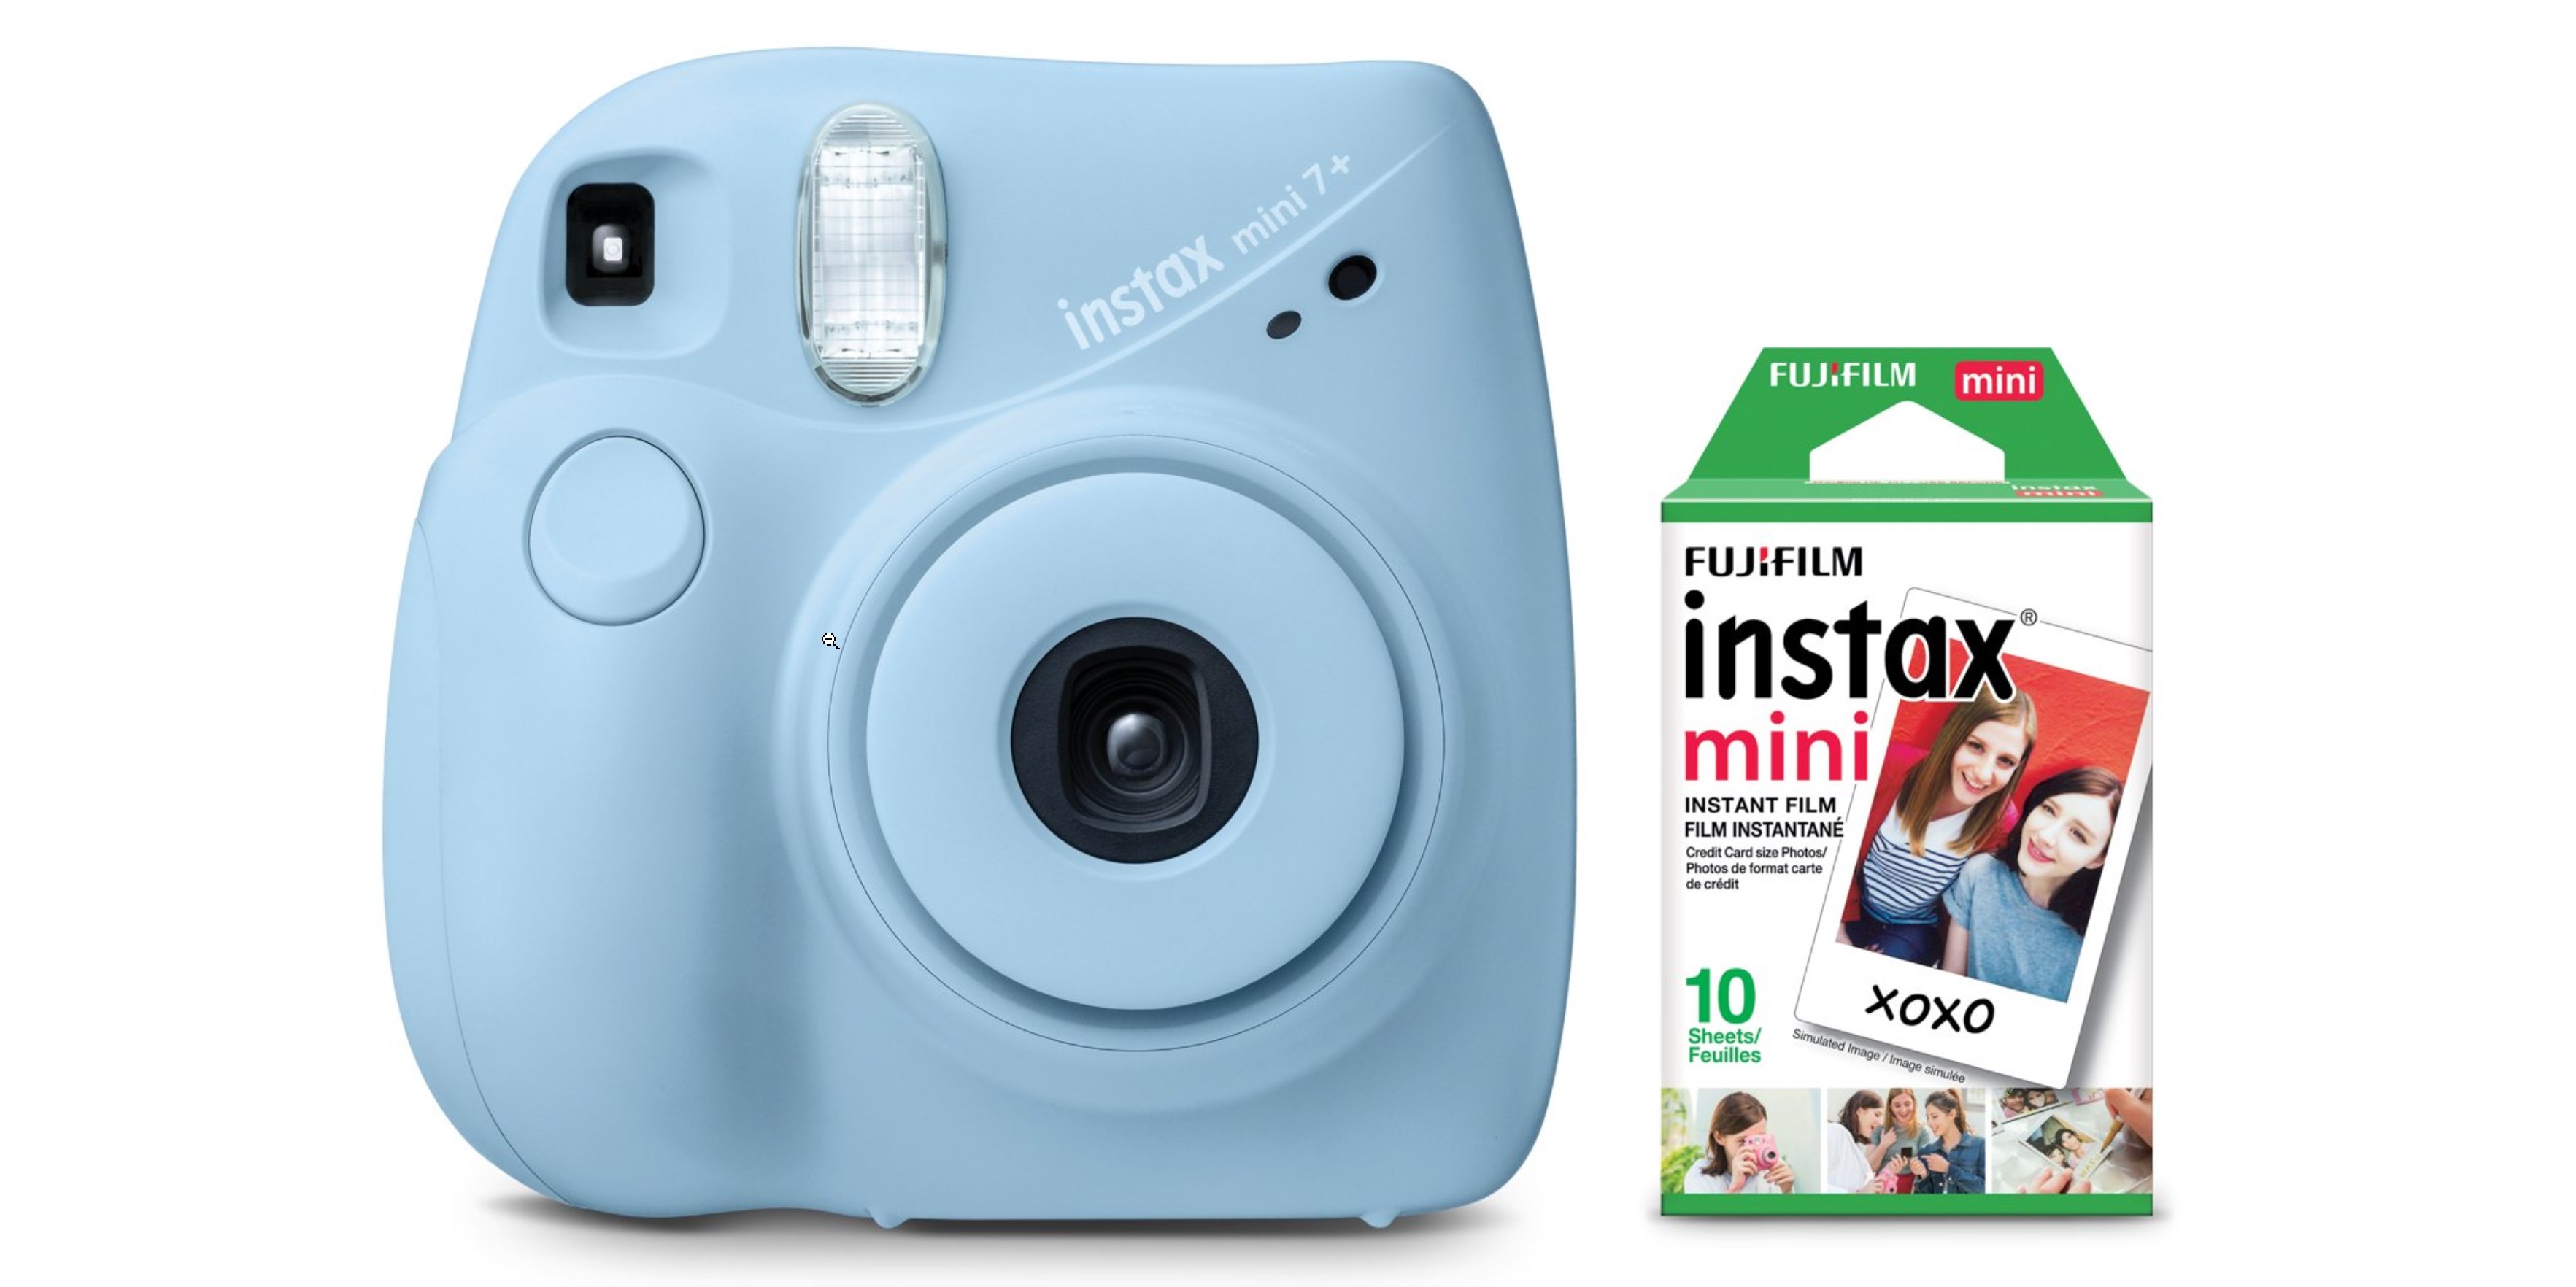 keep your old polaroid cases!!! use empty instax film packs as a holder